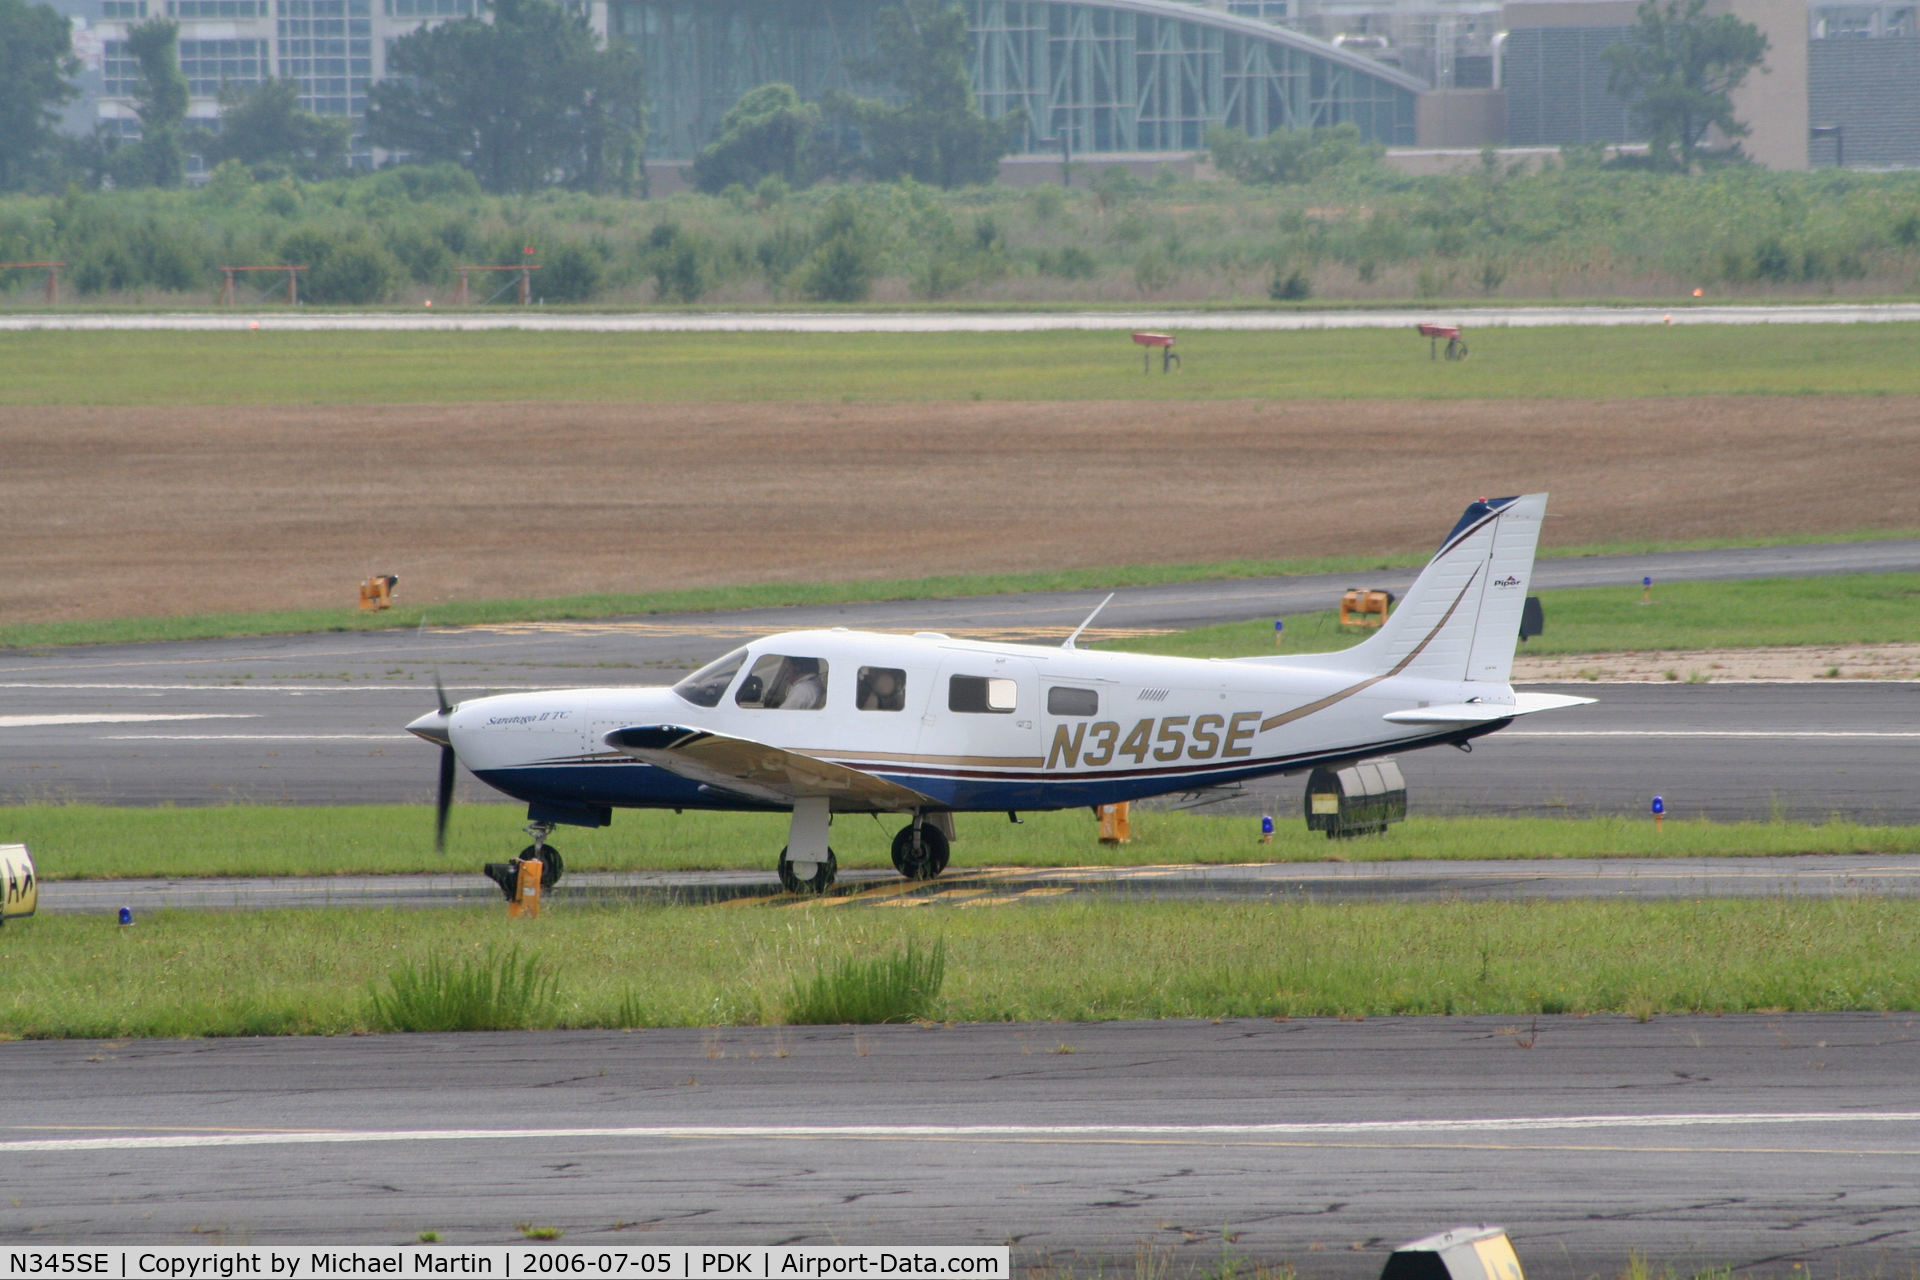 N345SE, 2004 Piper PA-32R-301T Turbo Saratoga C/N 3257345, Taxing to Signature Air